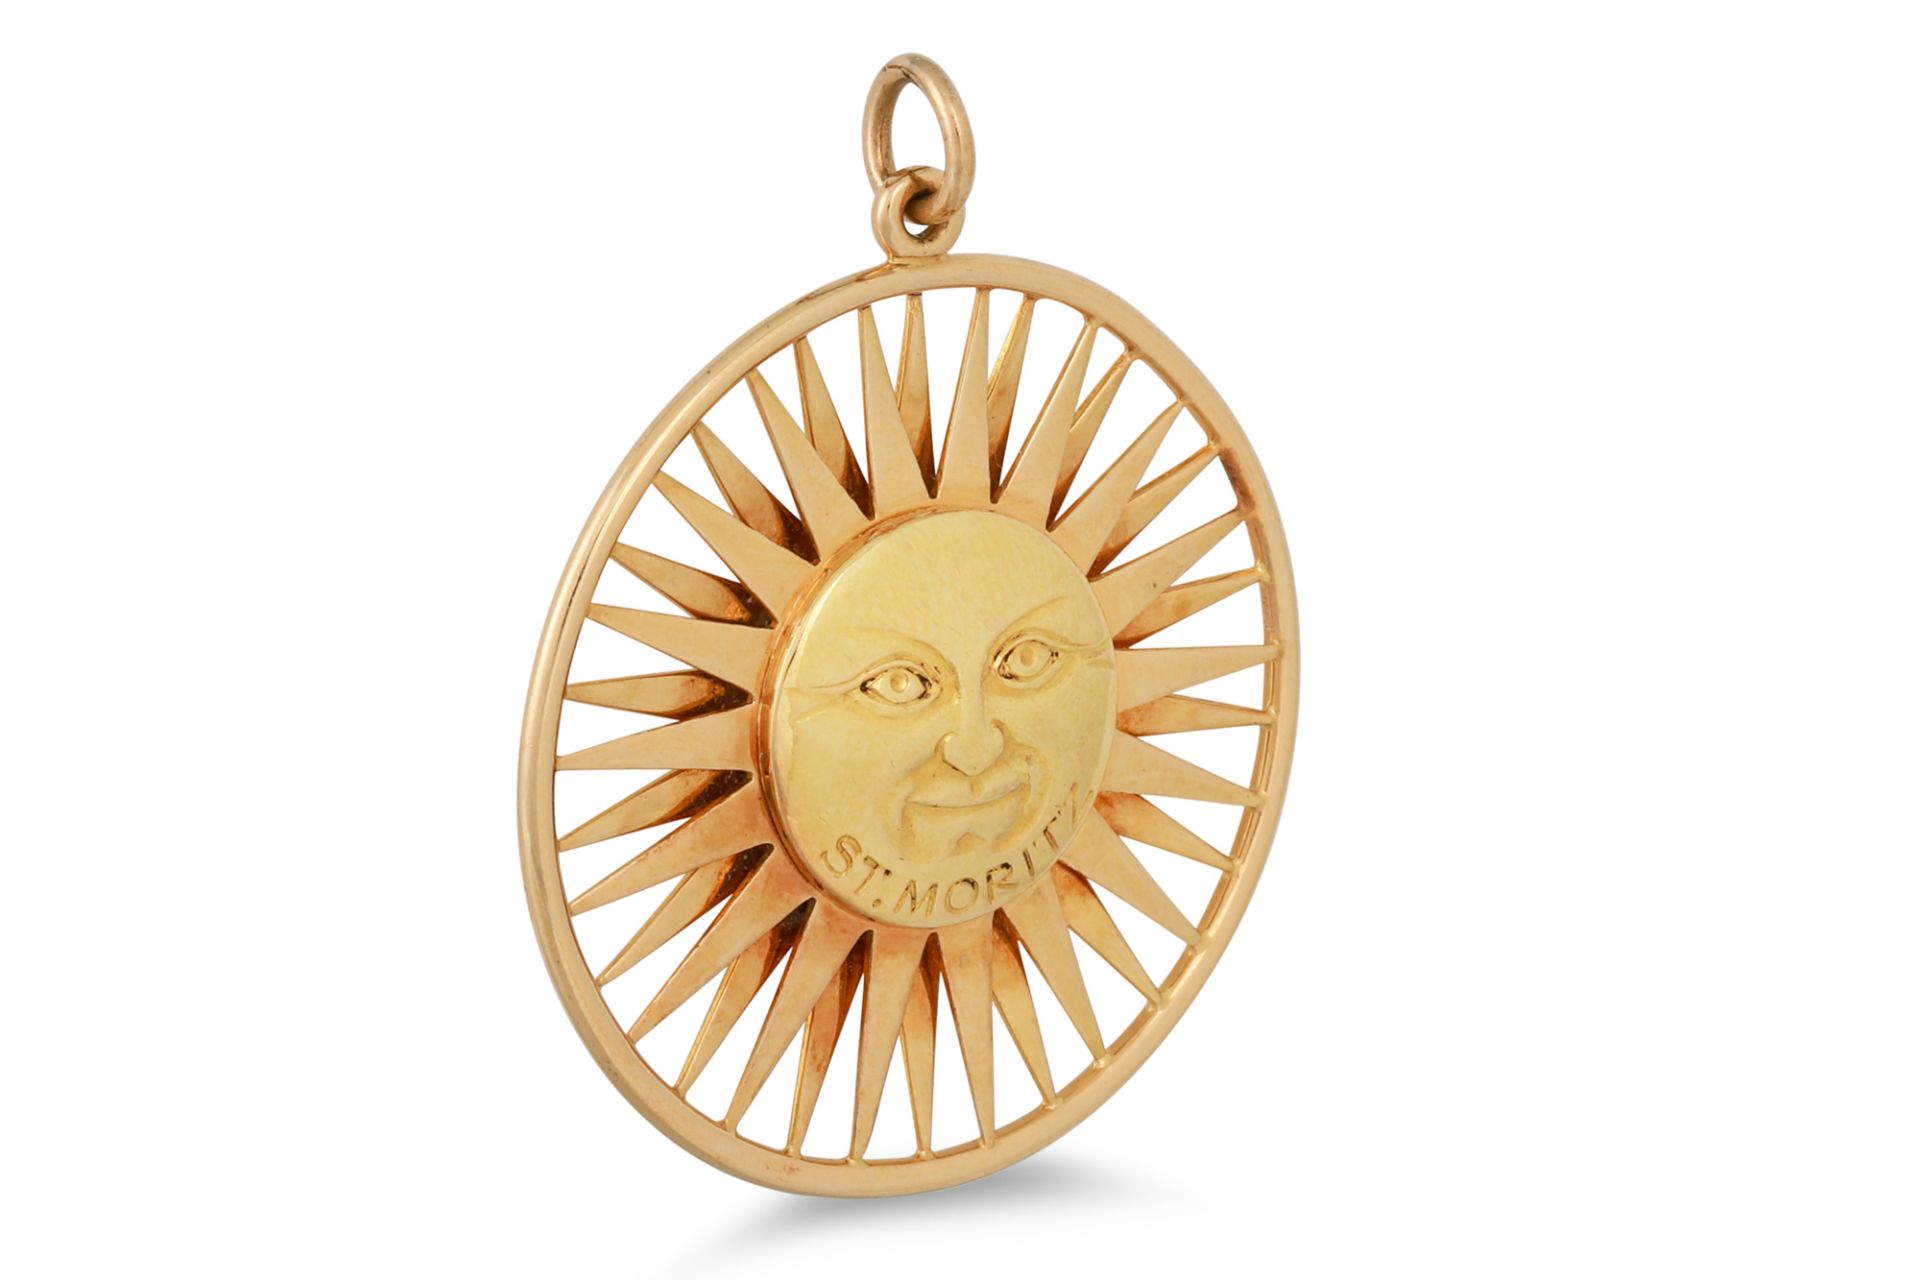 A CARVED CORAL AND 9CT GOLD BROOCH, a gold morning brooch and a sunburst 'St. Moritz' pendant - Image 2 of 4